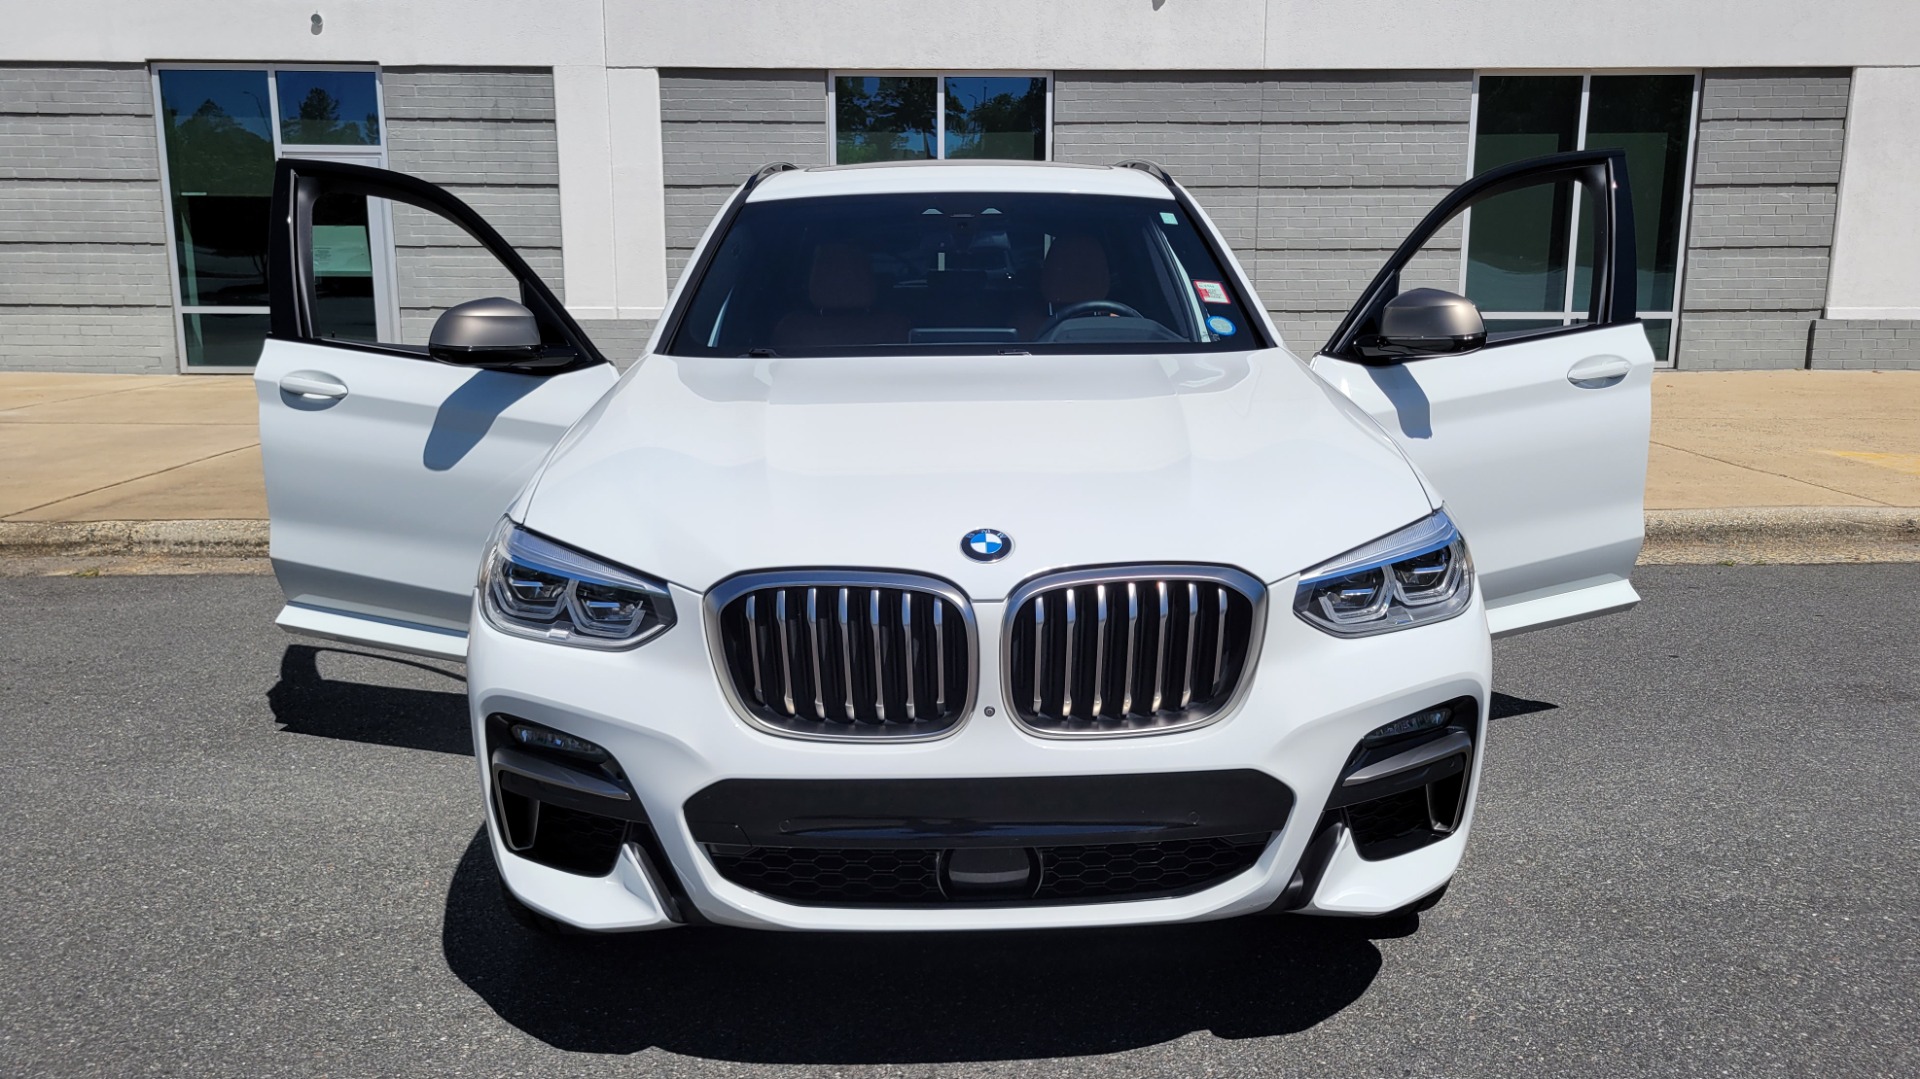 Used 2020 BMW X3 M40I EXECUTIVE PKG / DRVR ASST PLUS / H/K SND / HITCH / REARVIEW for sale $55,995 at Formula Imports in Charlotte NC 28227 26